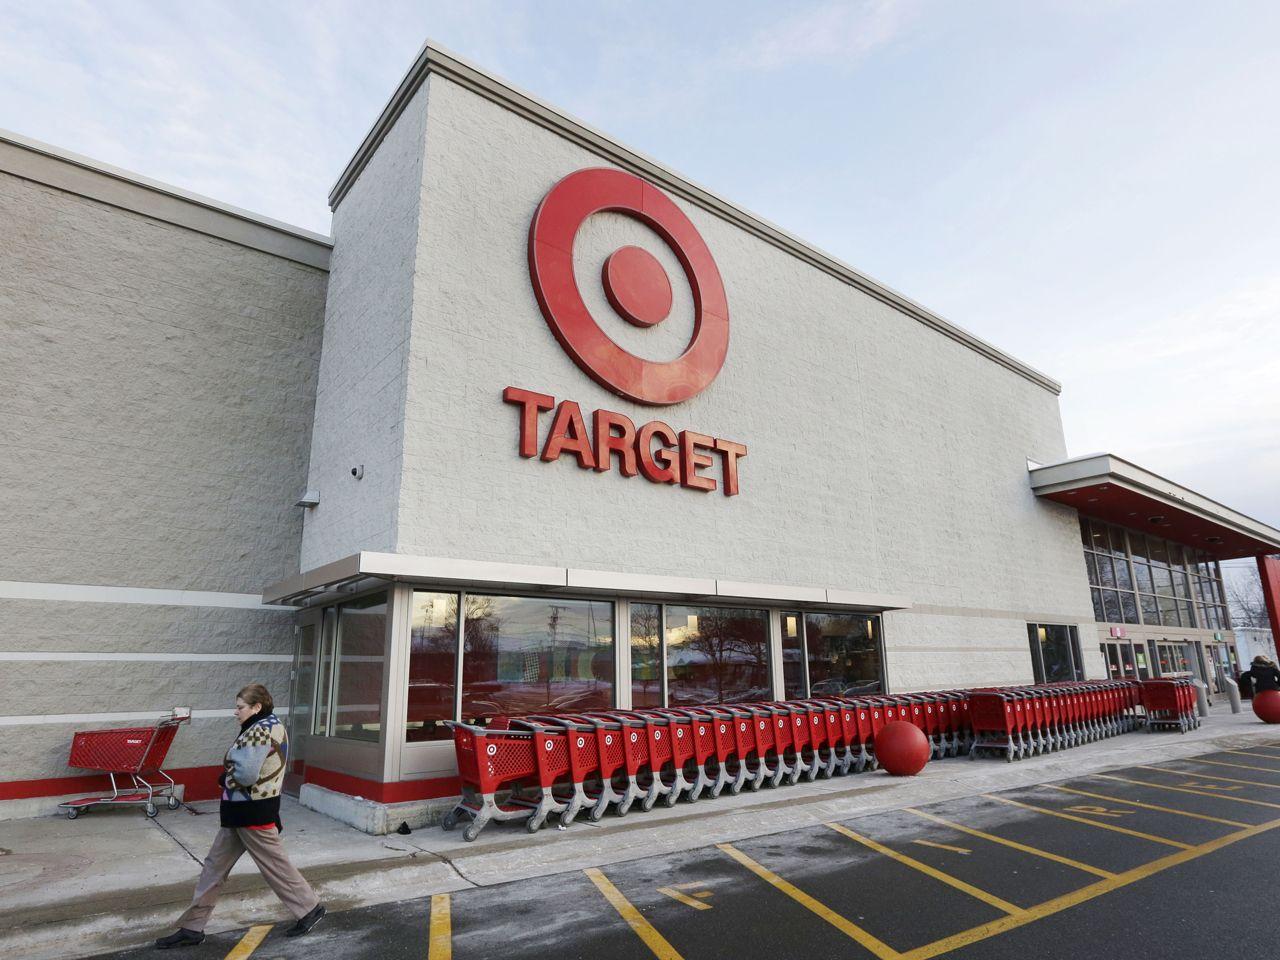 Target Department Store Logo - Lawsuits against Target piling up - CBS News